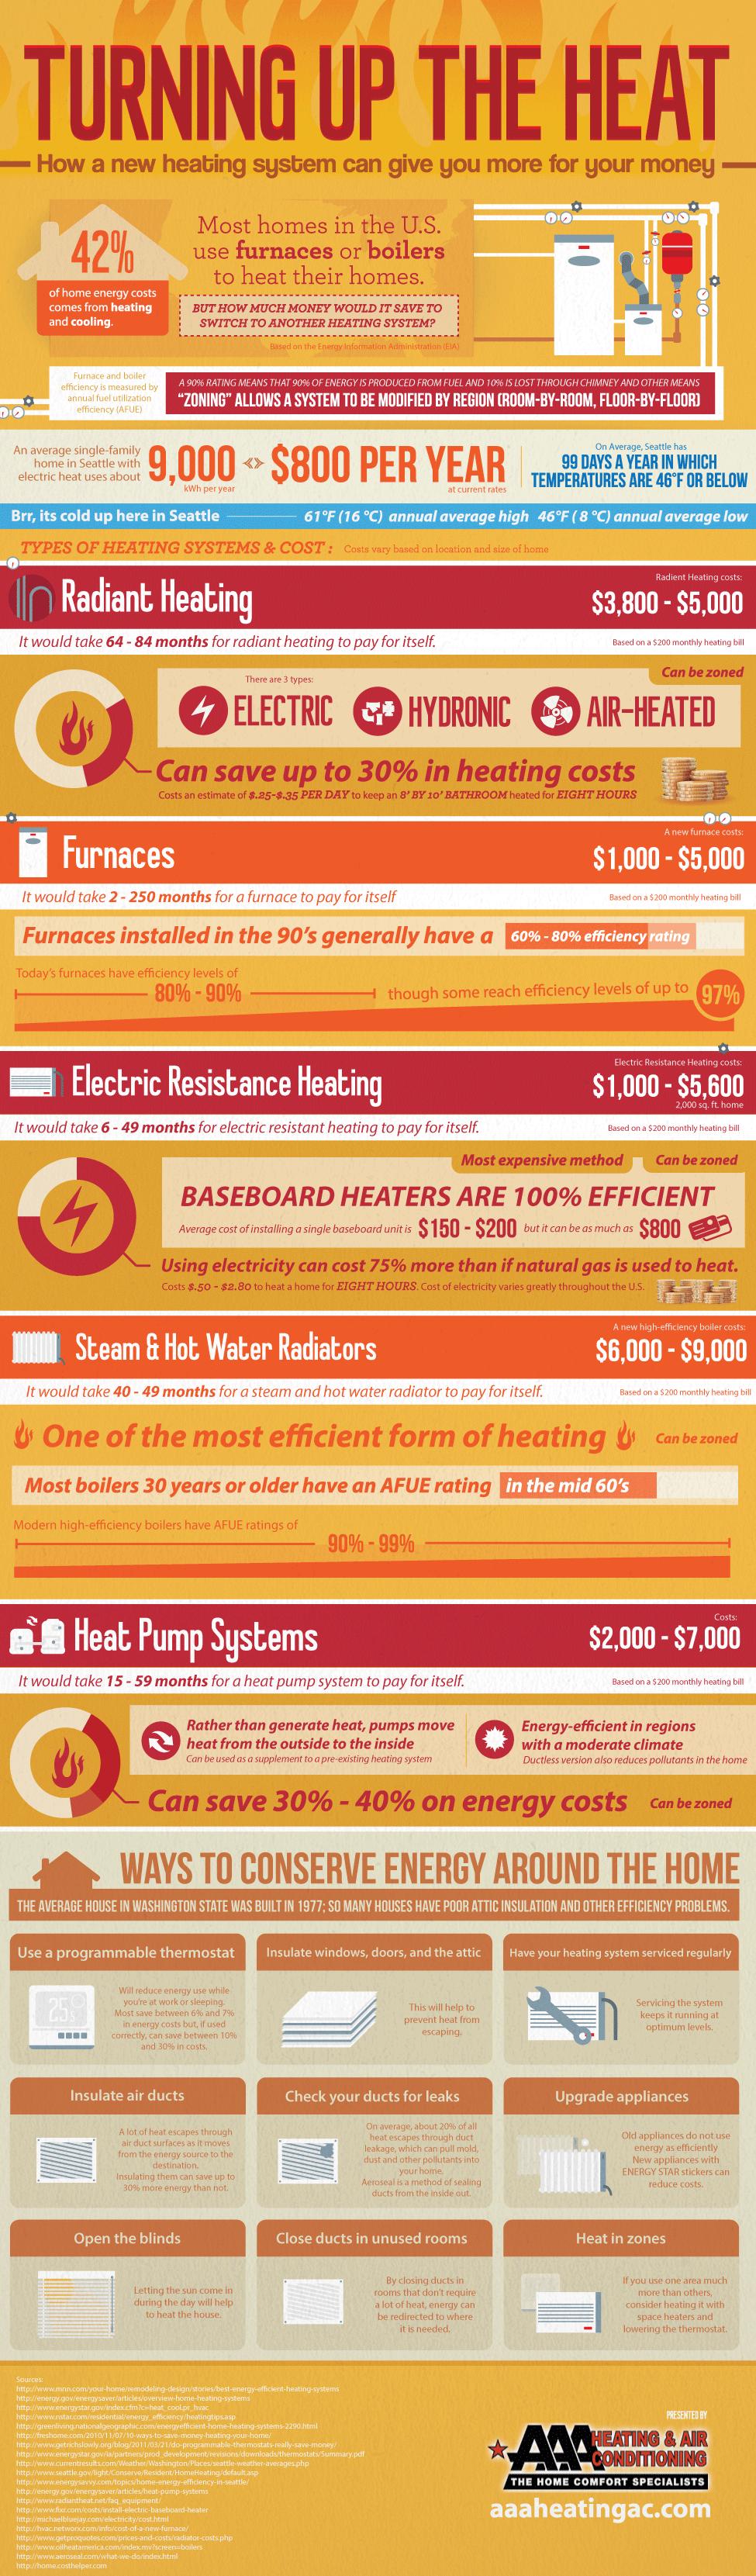 Turning Up the Heat [Infographic]